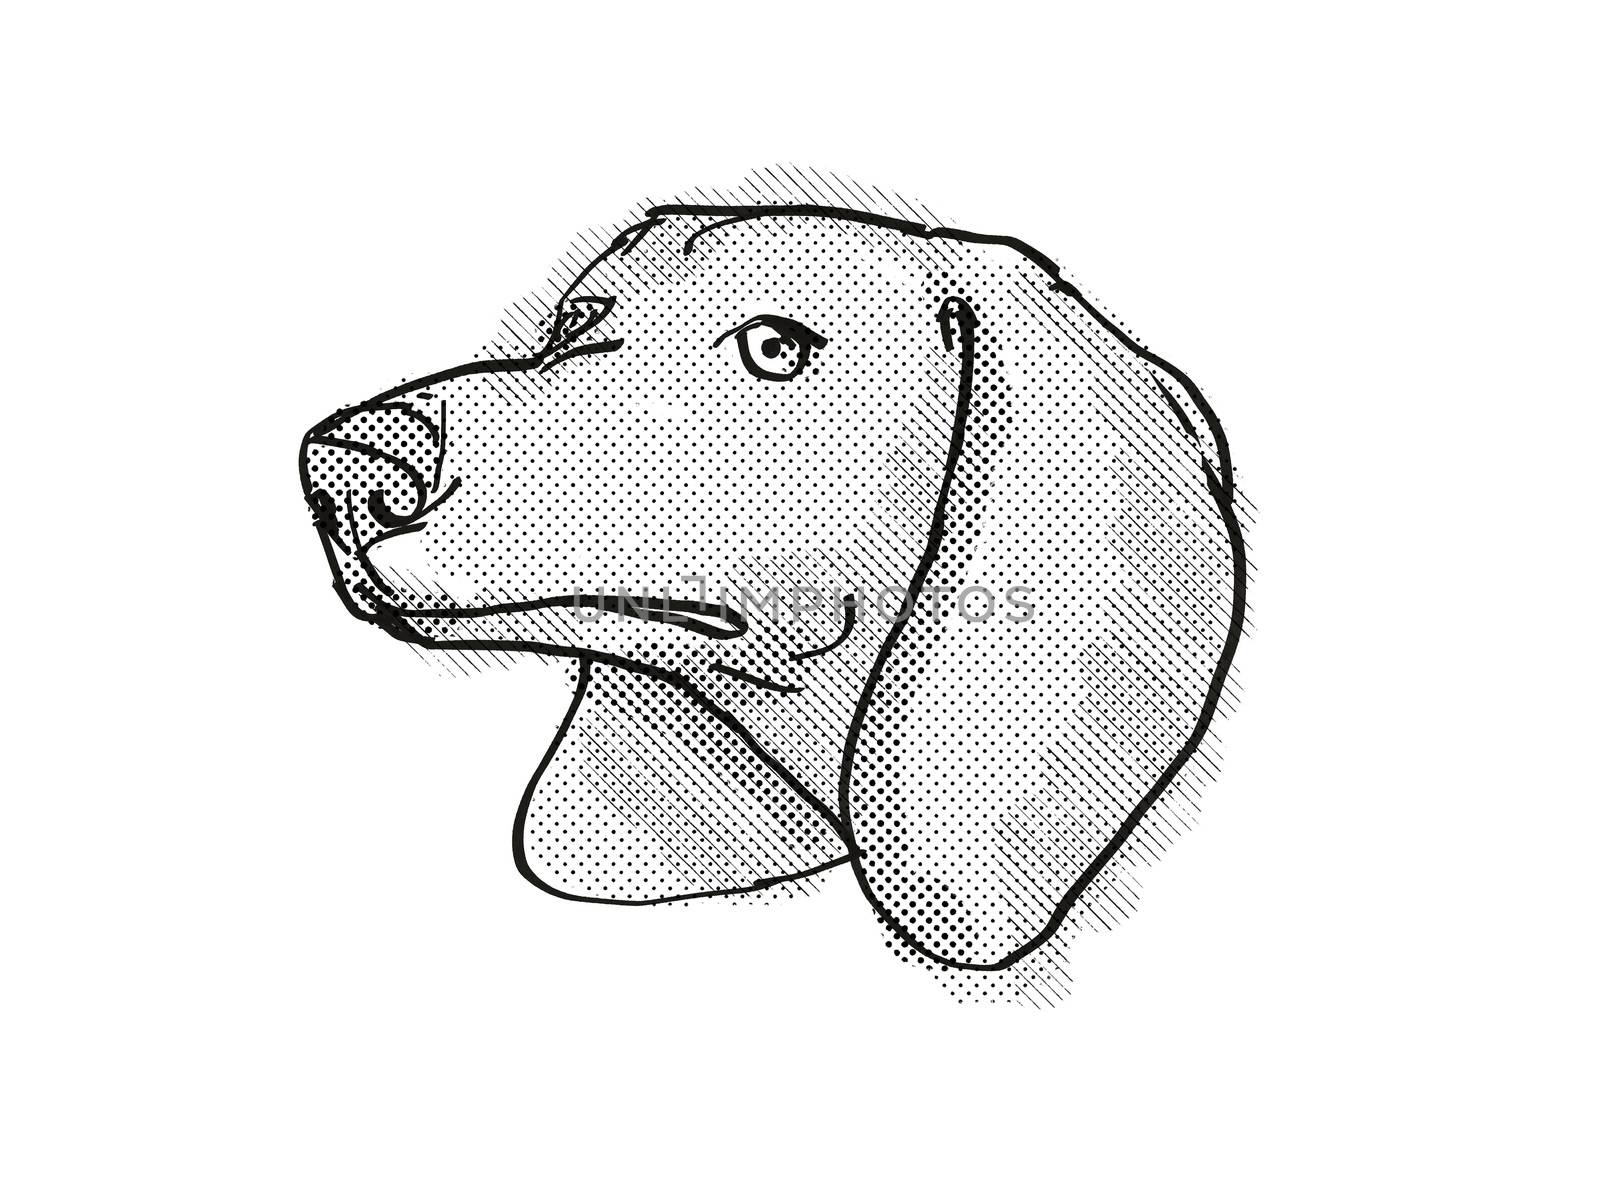 Retro cartoon style drawing of head of a Dachshund, a domestic dog or canine breed on isolated white background done in black and white.